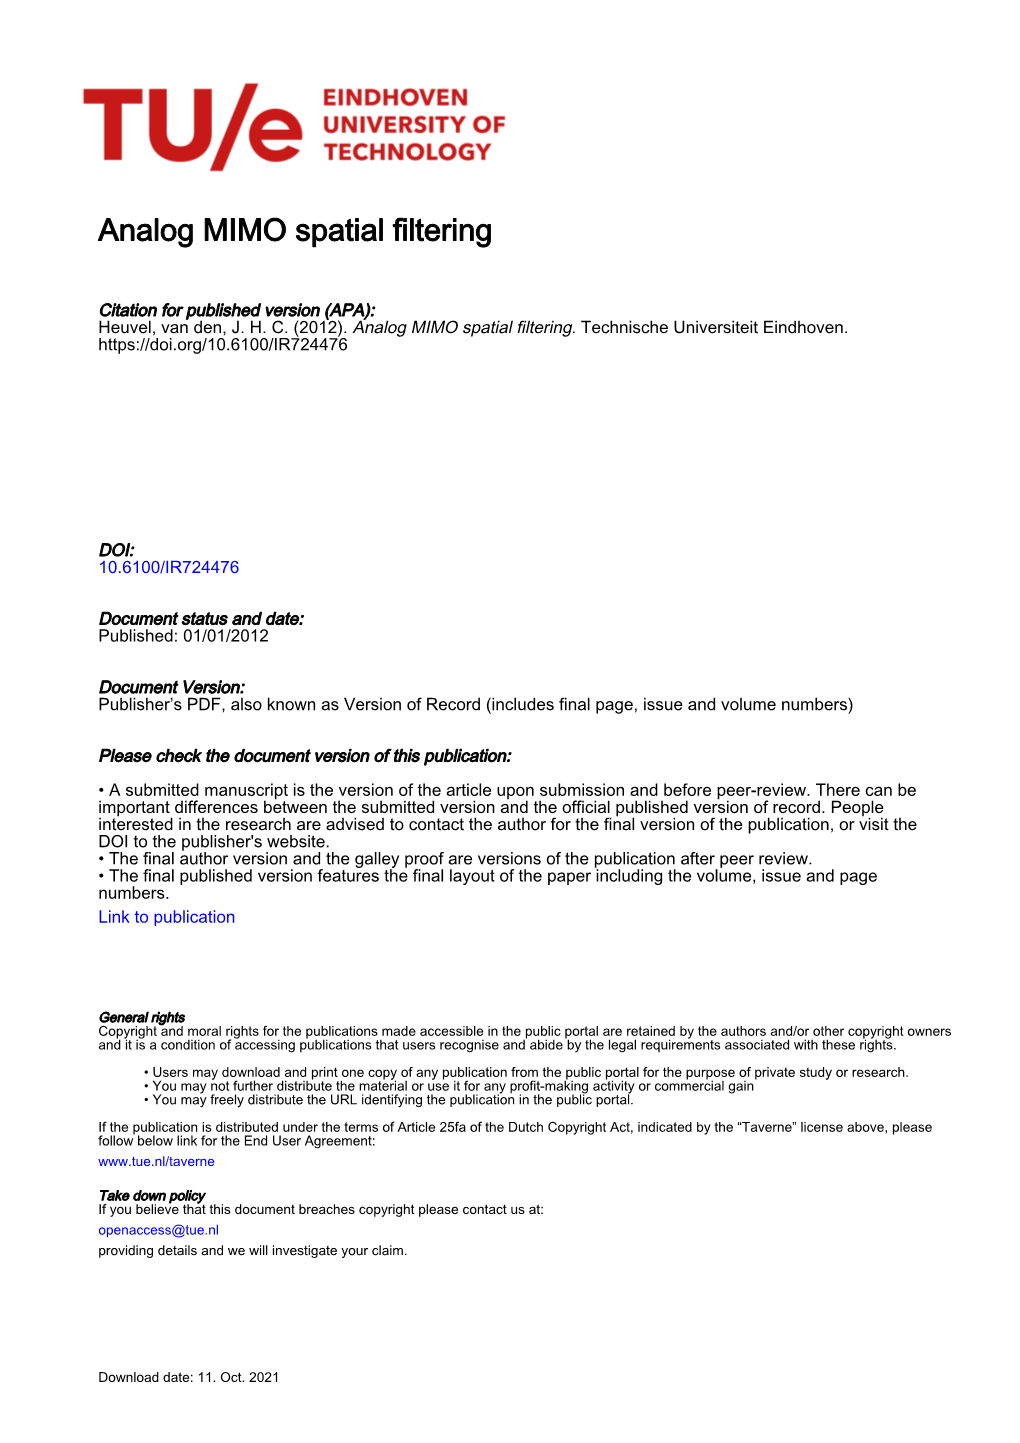 Analog MIMO Spatial Filtering